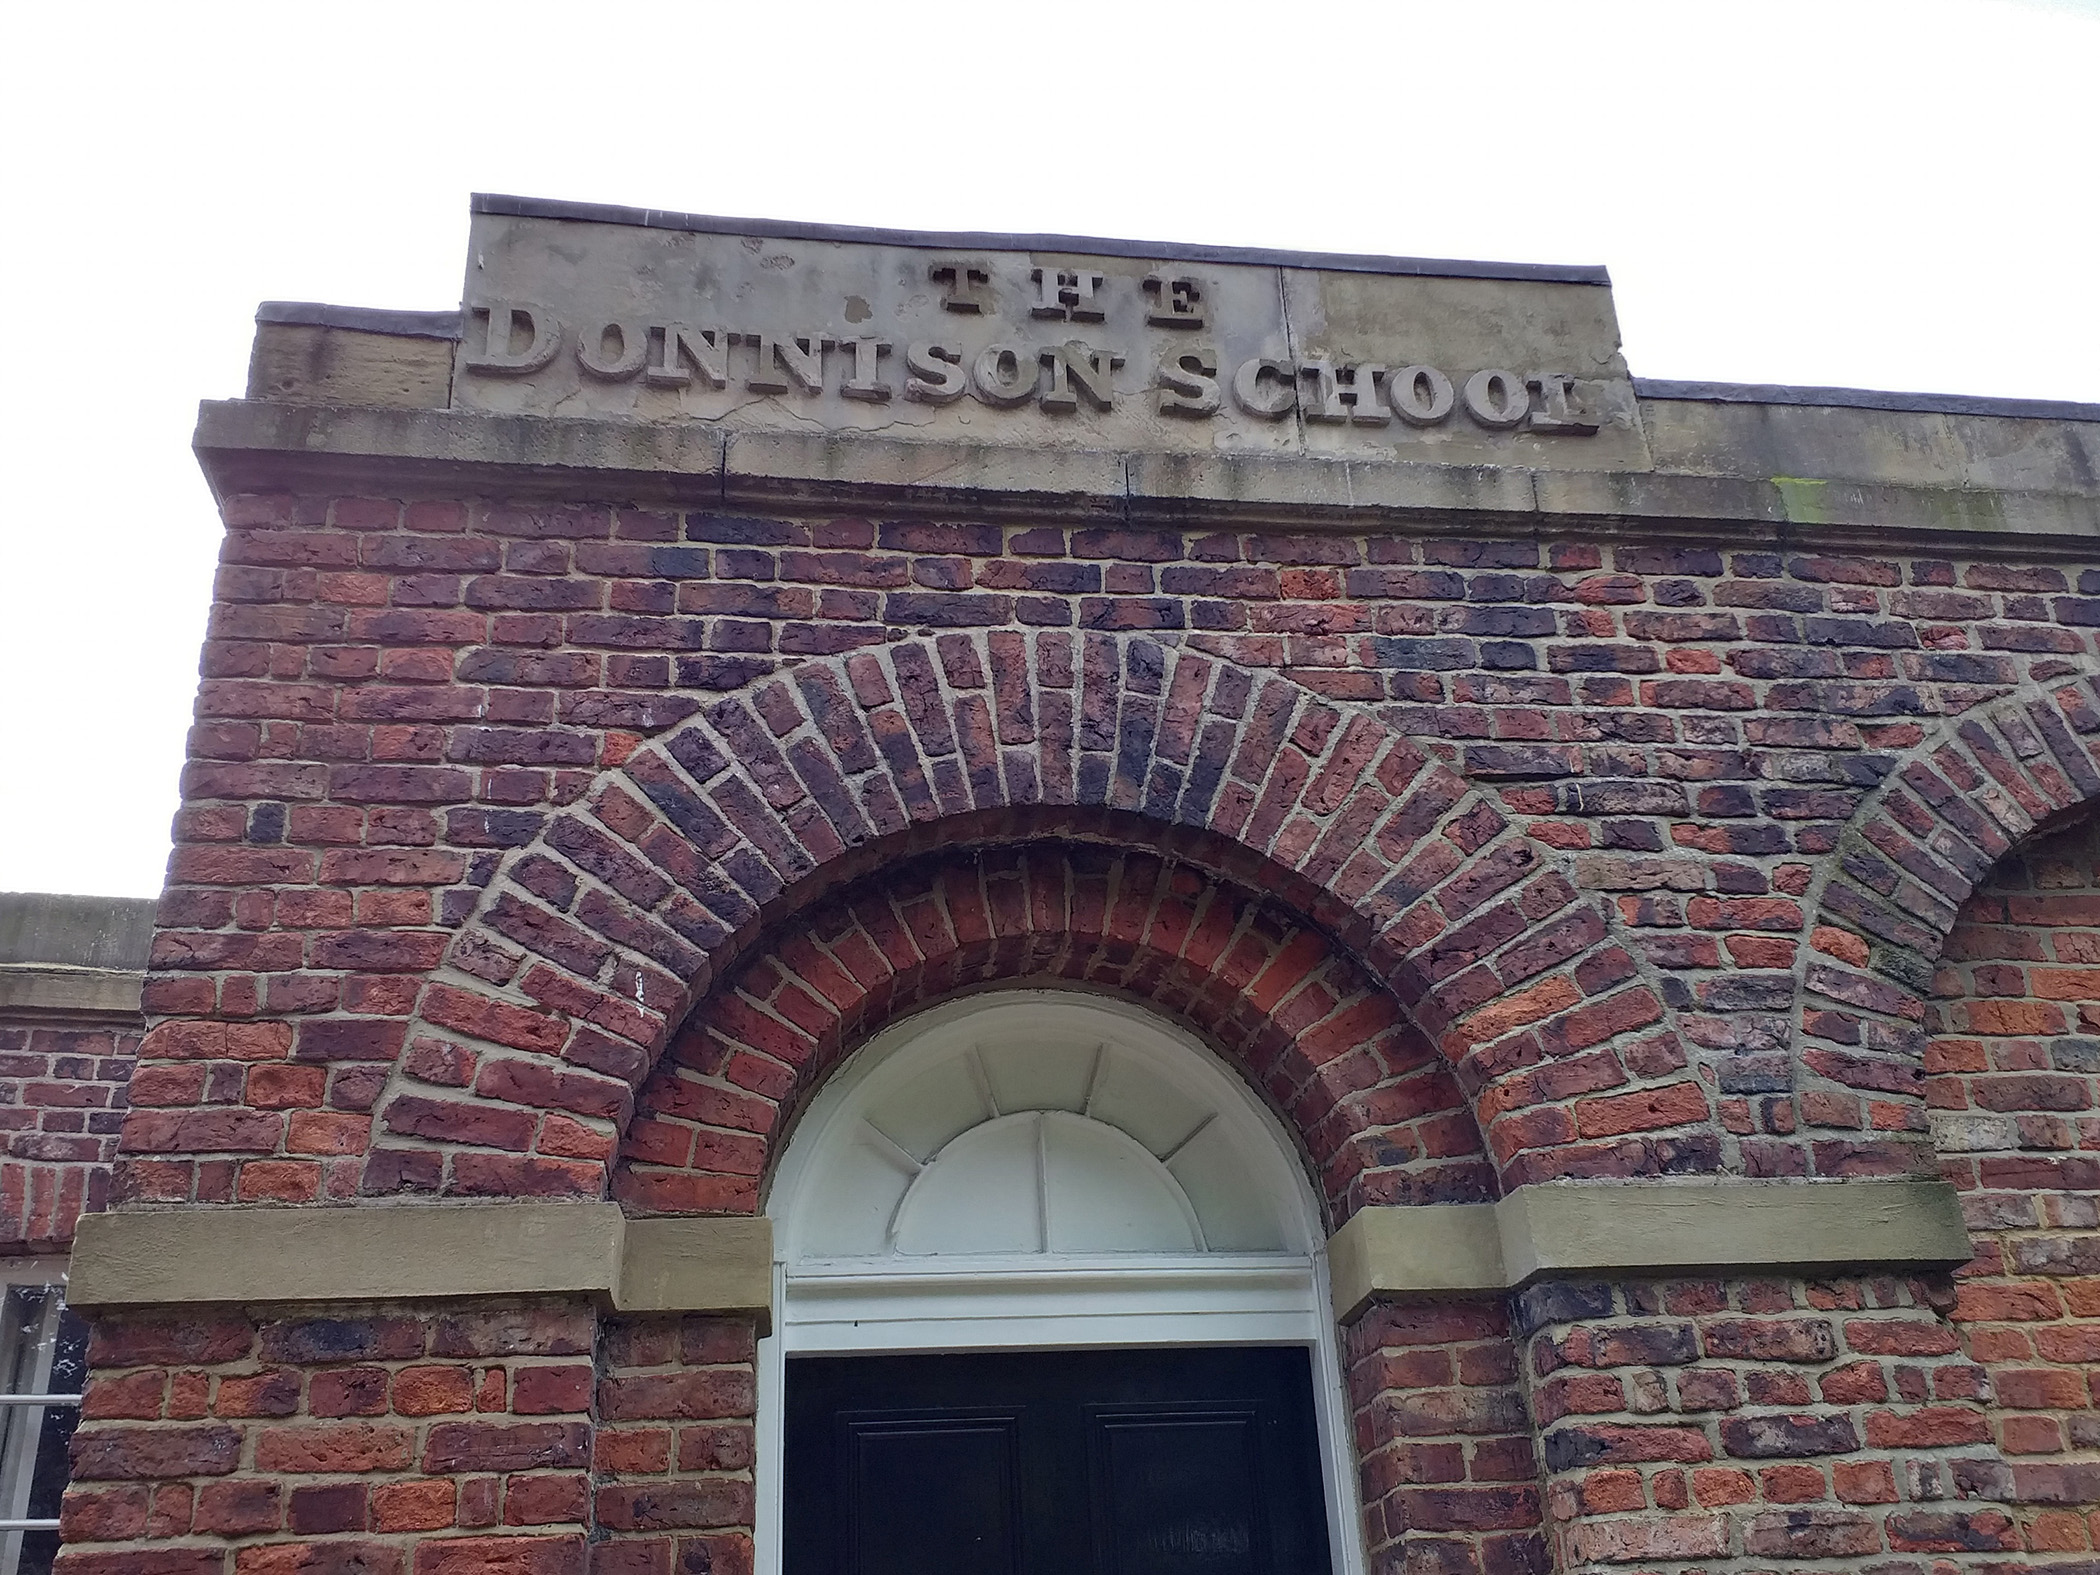 THE DONNISON SCHOOL in top panel above a door in low-relief letters